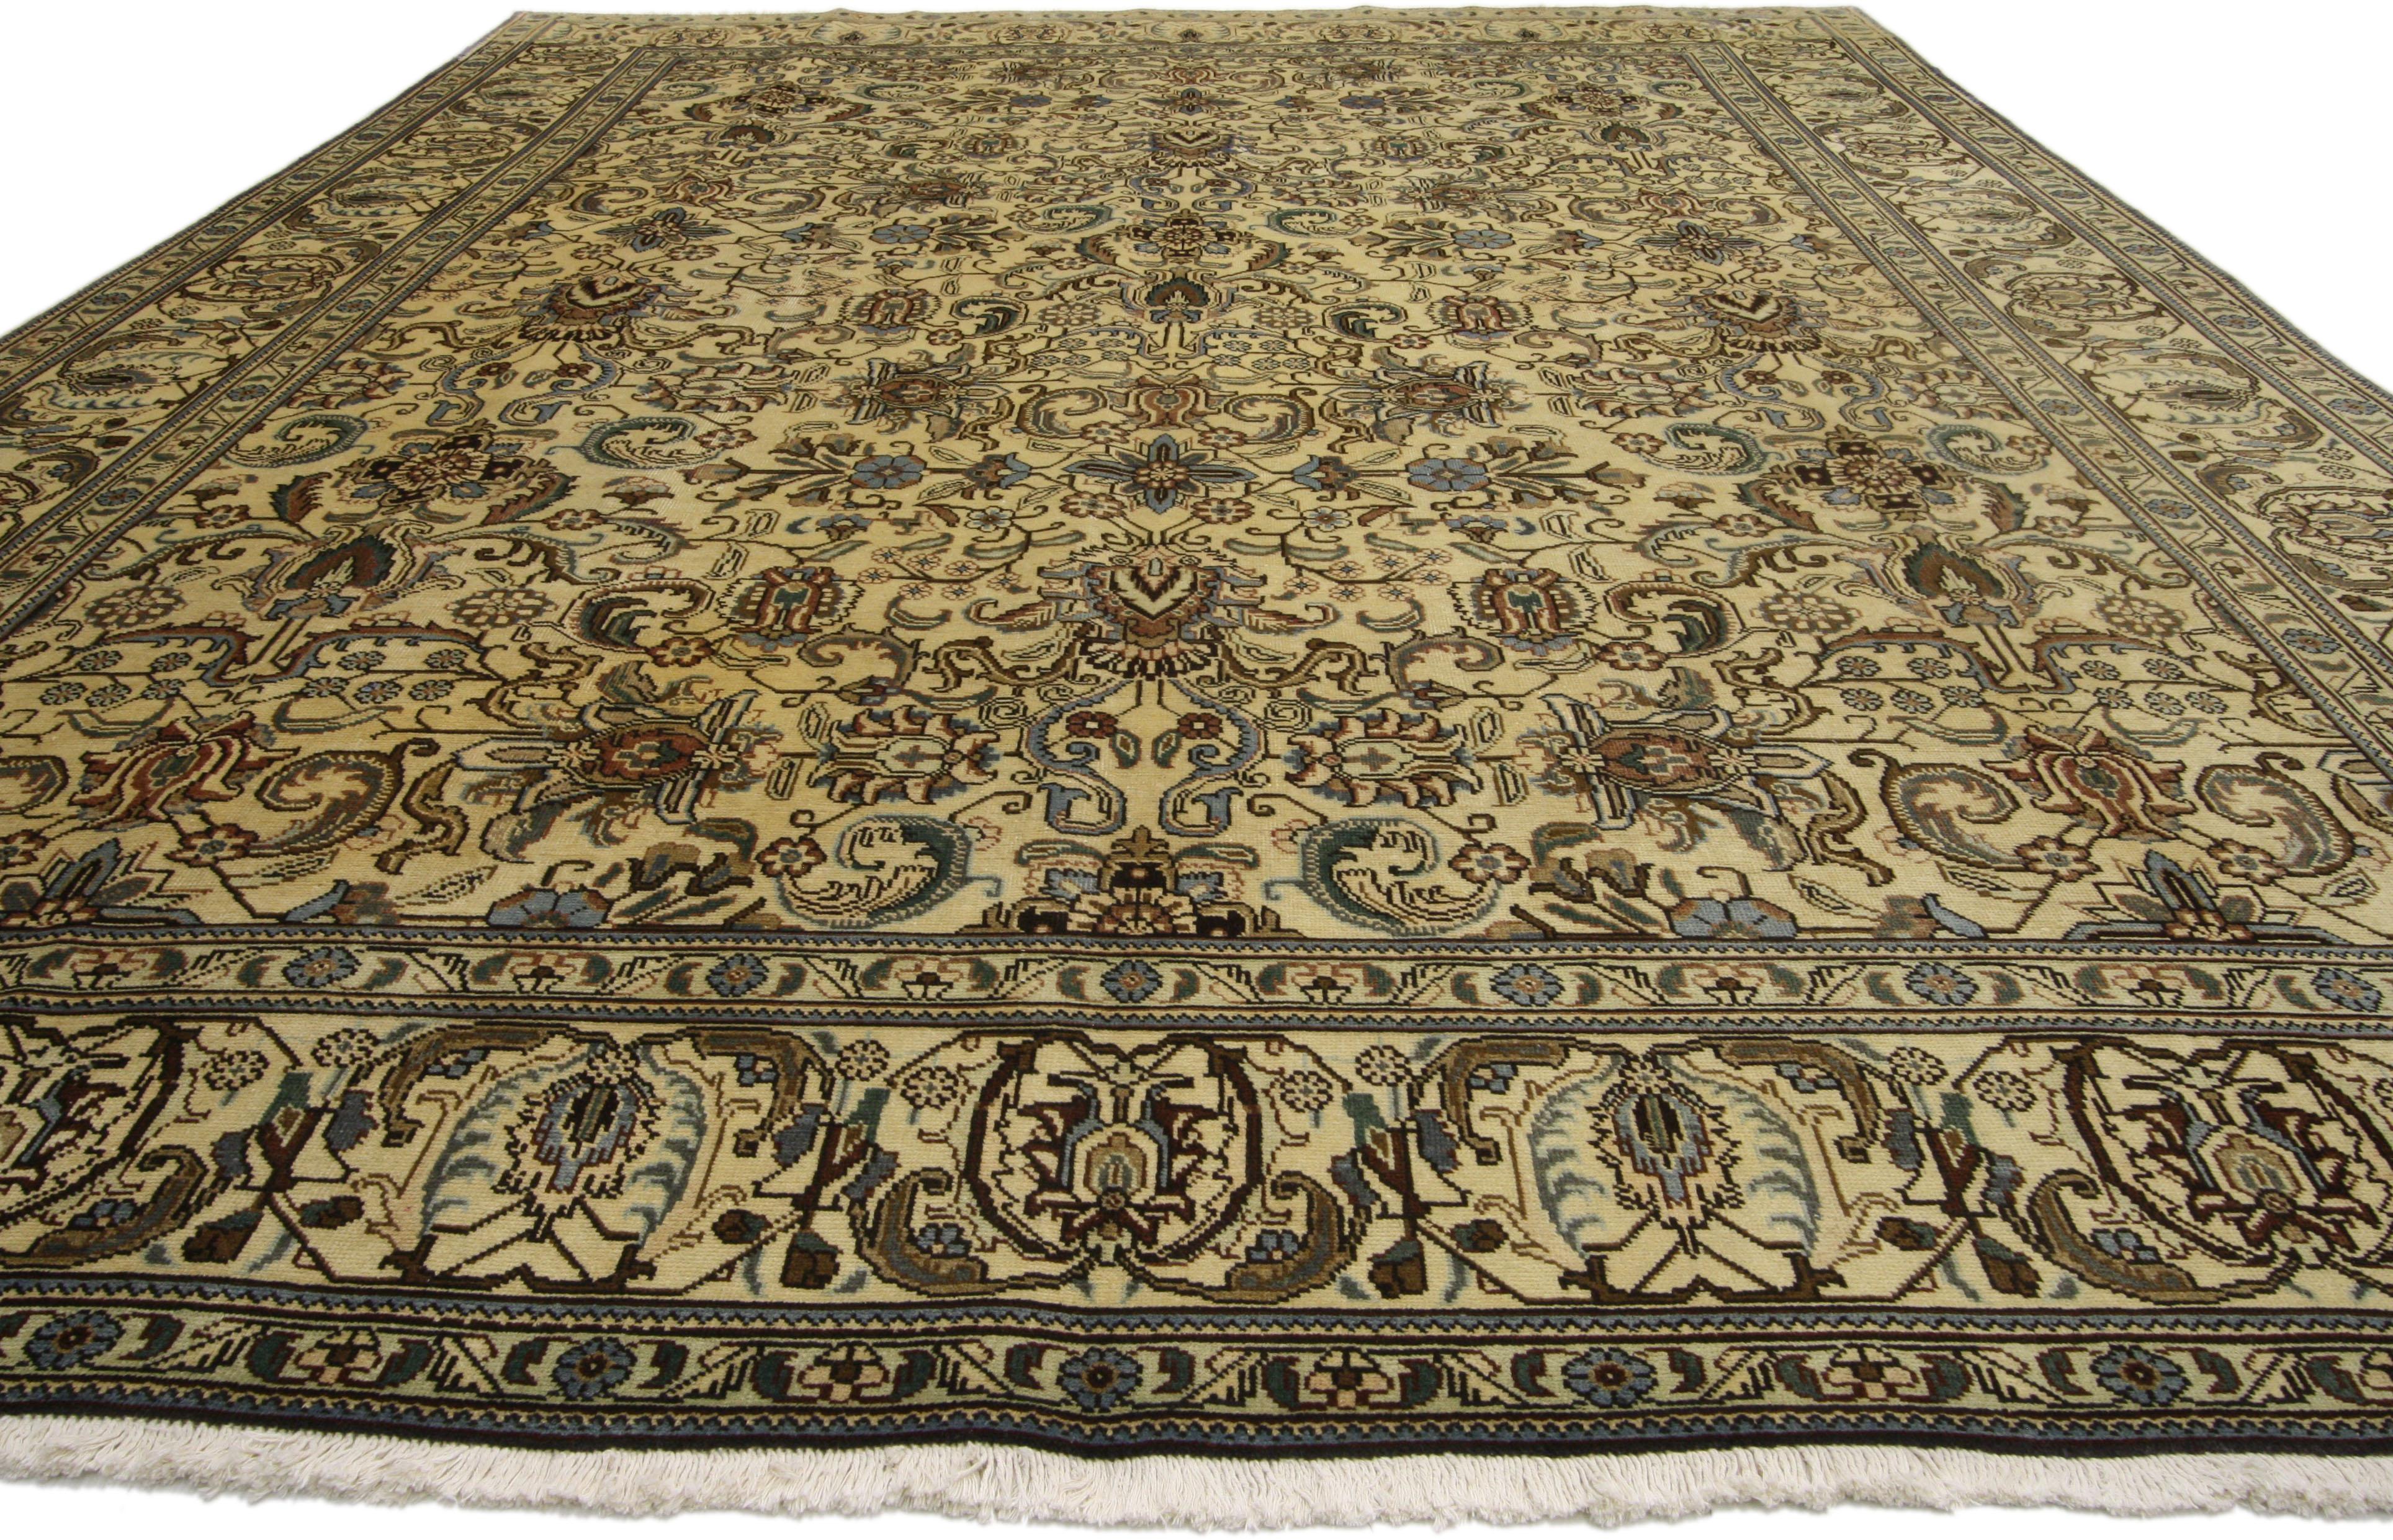 76473, vintage Persian Tabriz area rug with traditional style. This hand-knotted wool vintage Persian Tabriz rug features an all-over pattern surrounded by a classic border creating a well-balanced and timeless design. This vintage Persian Tabriz